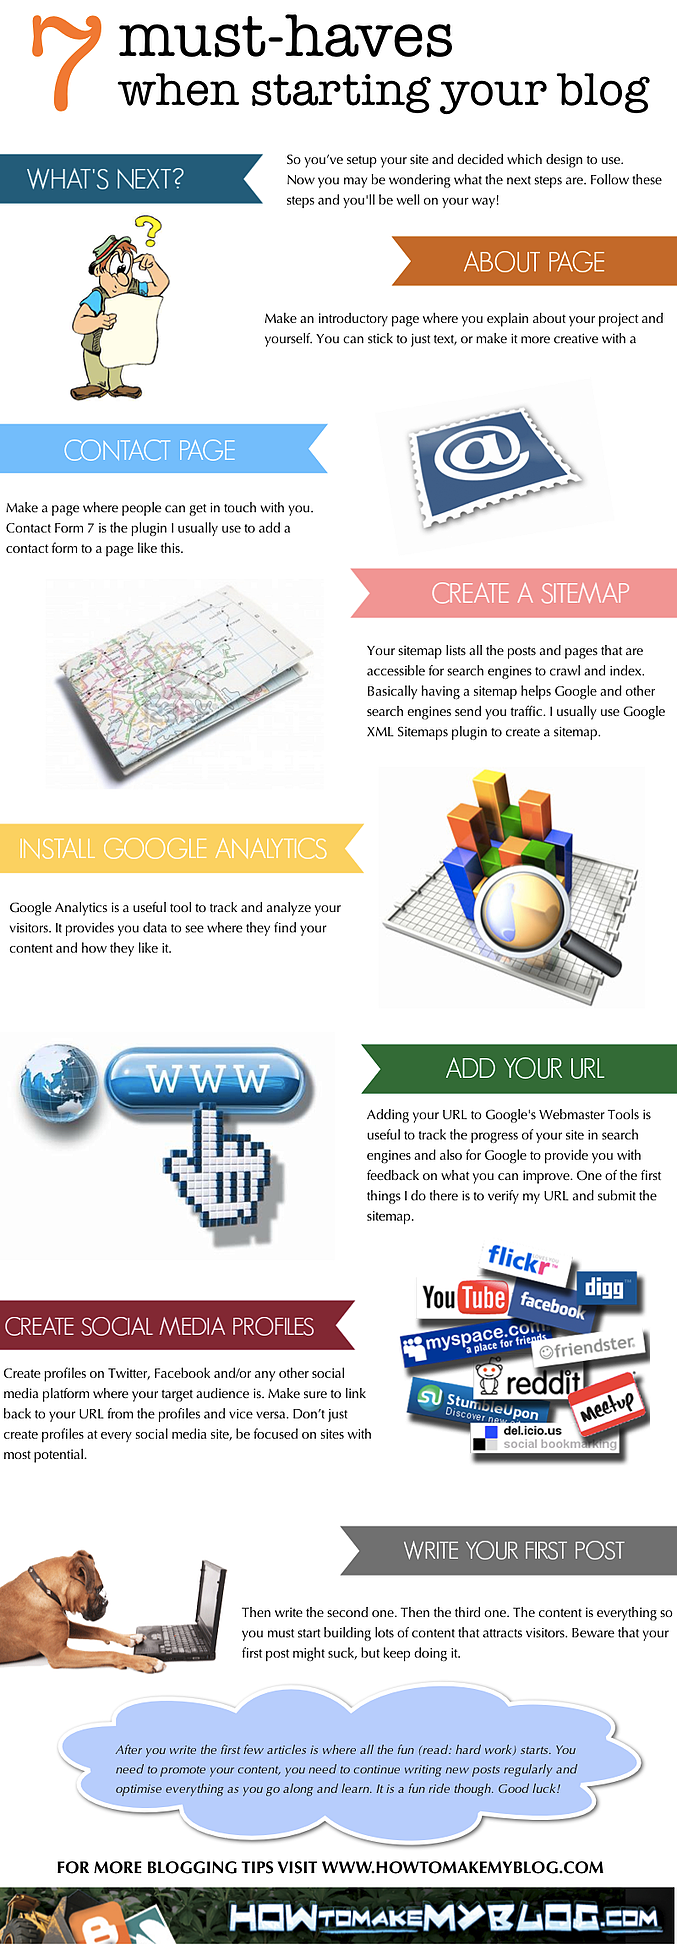 best Business blogs start with your website